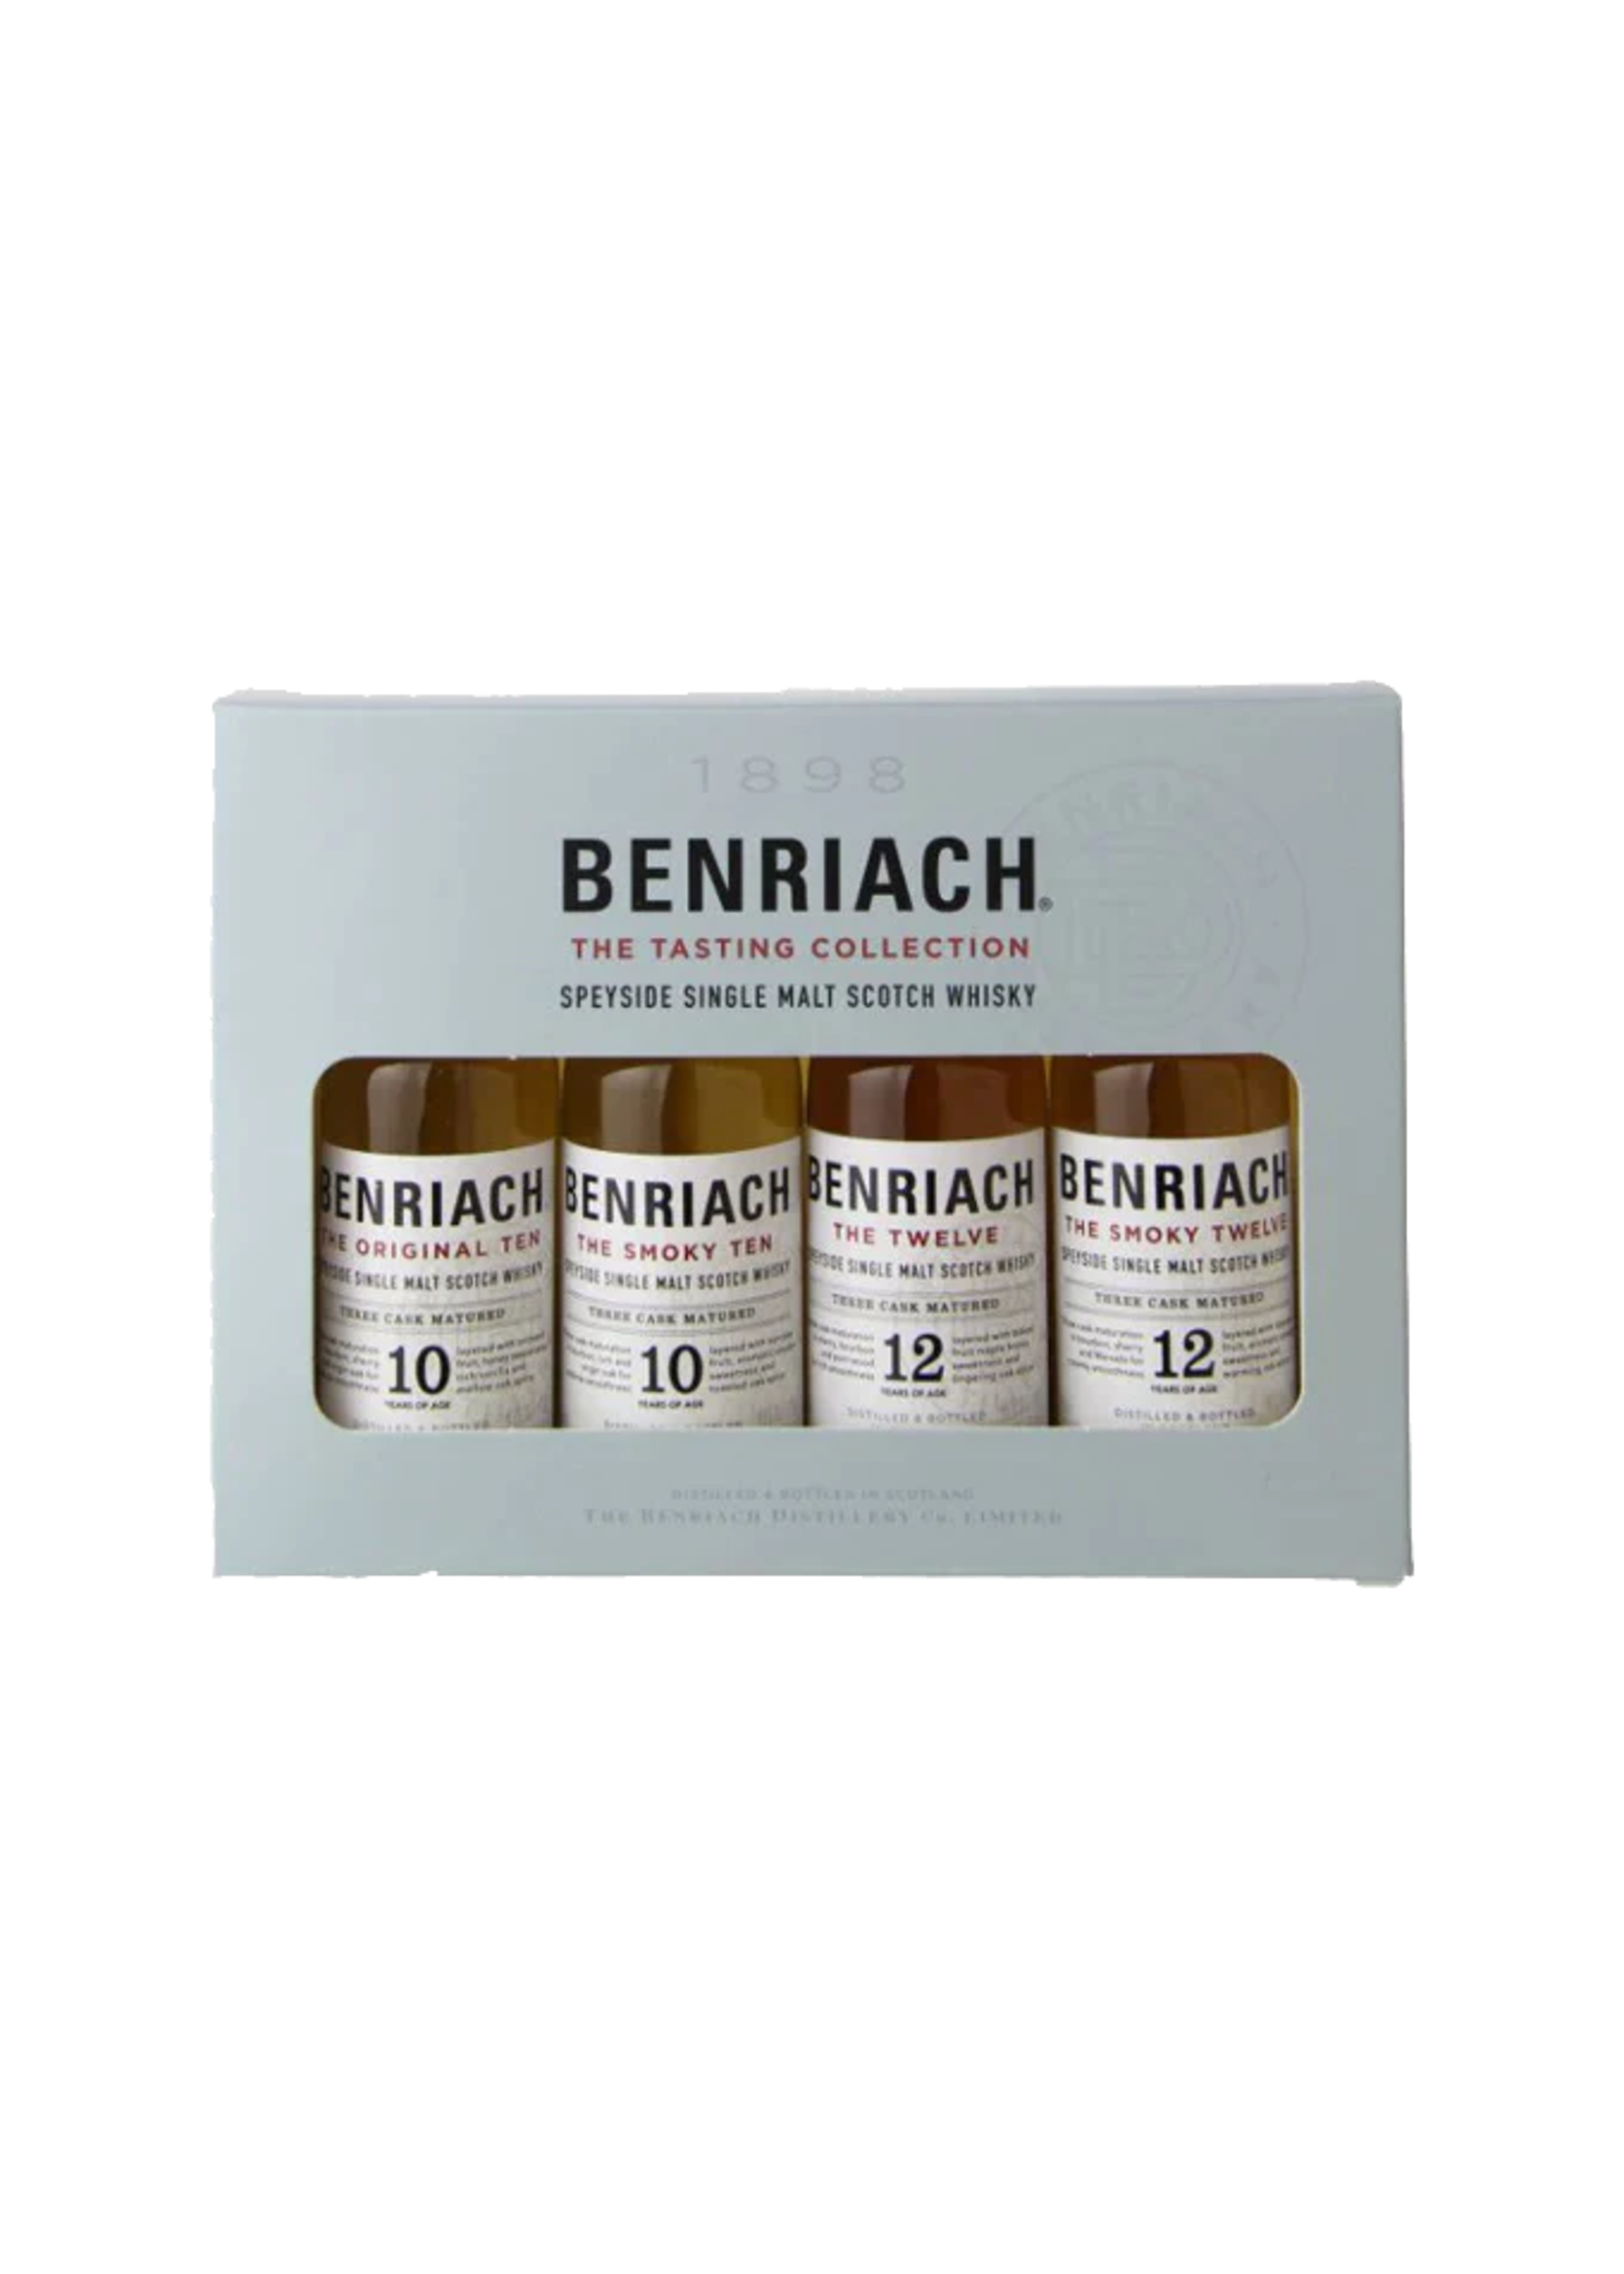 Benriach BenRiach / Tasting Collection Gift Set The Original 10 Year, The Smokey 10, The 12 Year, and The Smokey 12 Year / 50mL 4x